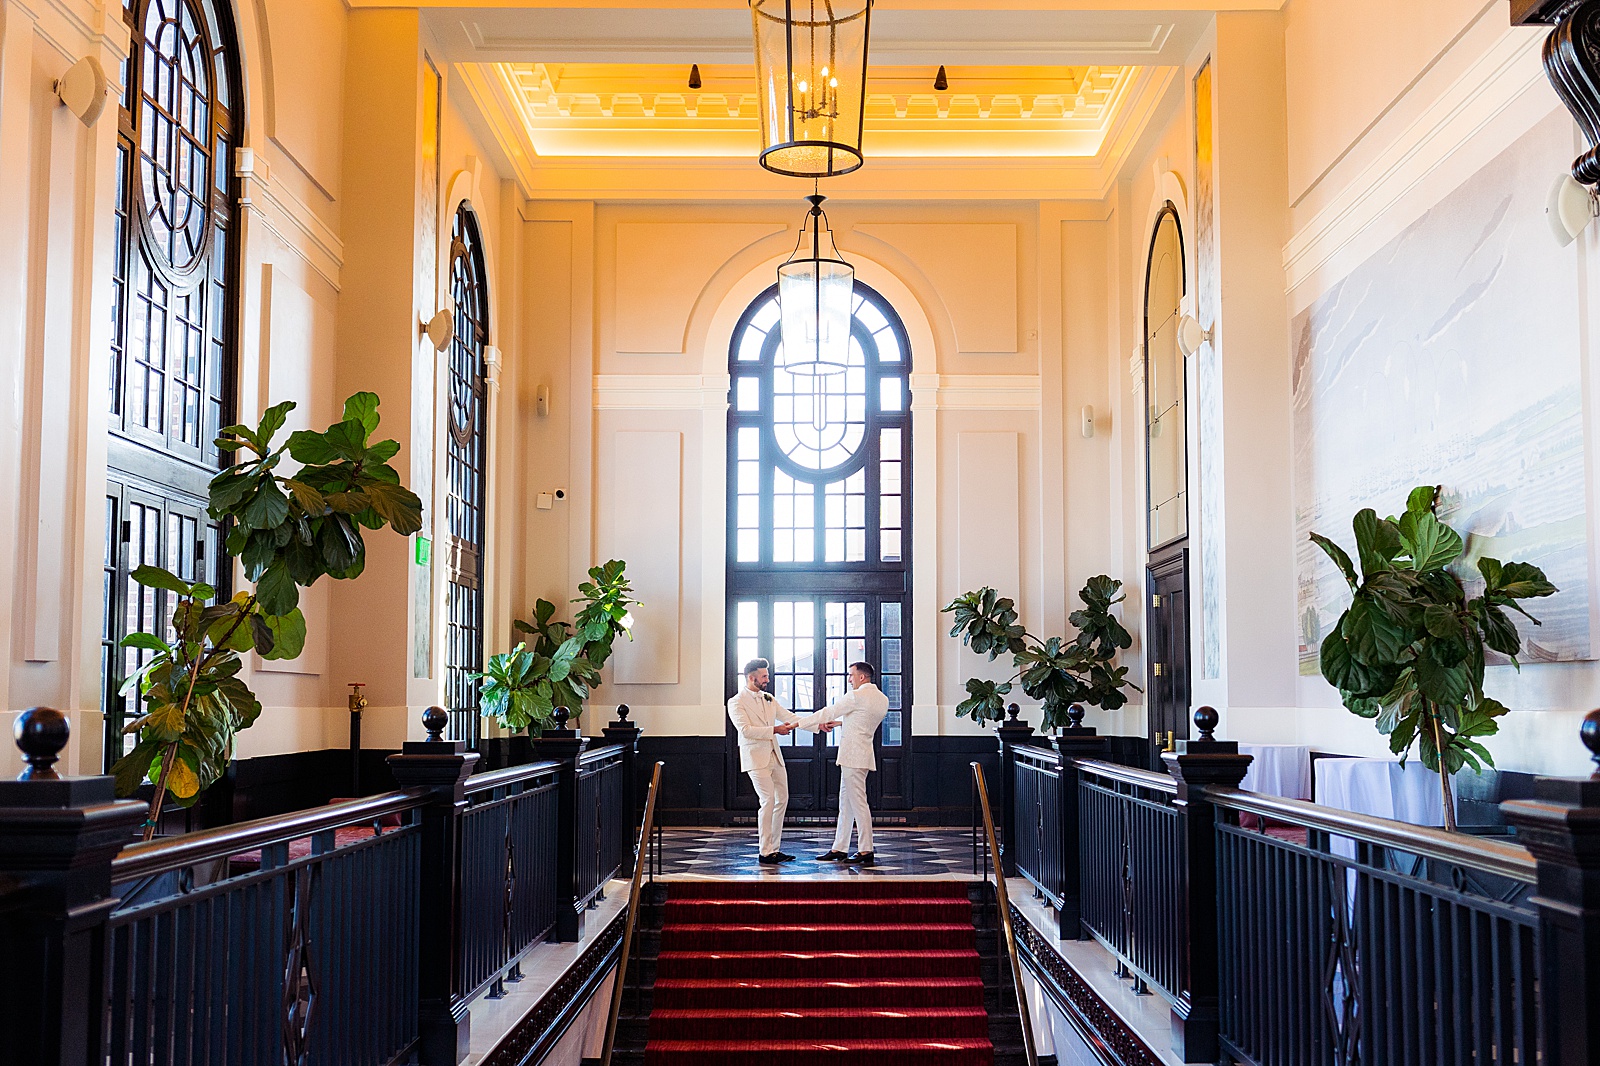 Two grooms dance in the hallway of the Sagamore Pendry in Baltimore to illustrate that you can have fun while taking wedding photos! "Will I have fun?" is one of my top questions to ask your wedding photographer before booking.